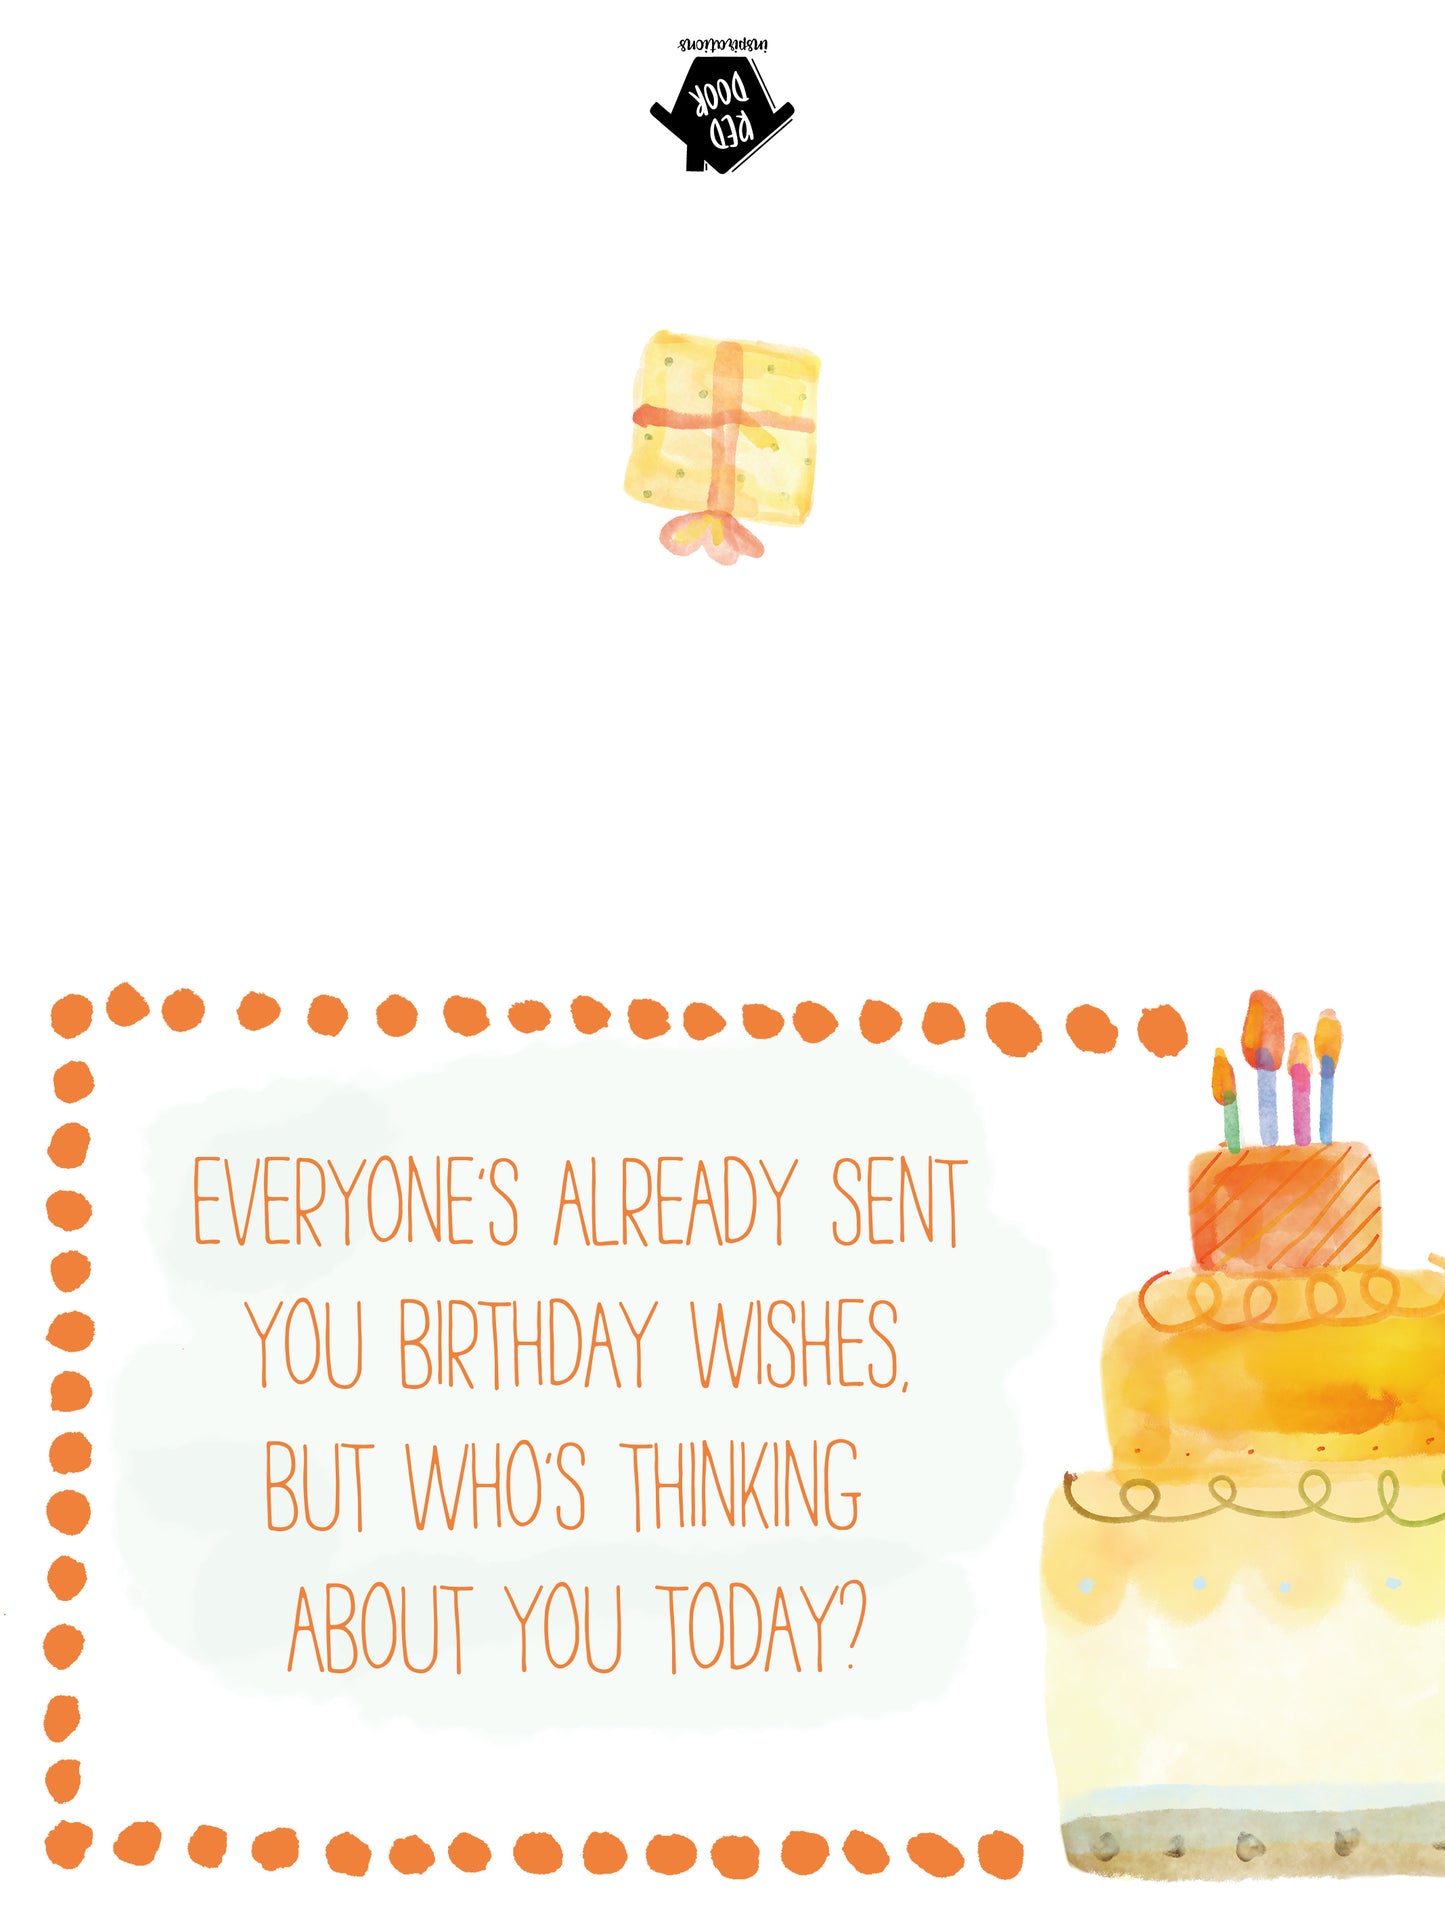 Belated Birthday Humorous - Includes 25 cards